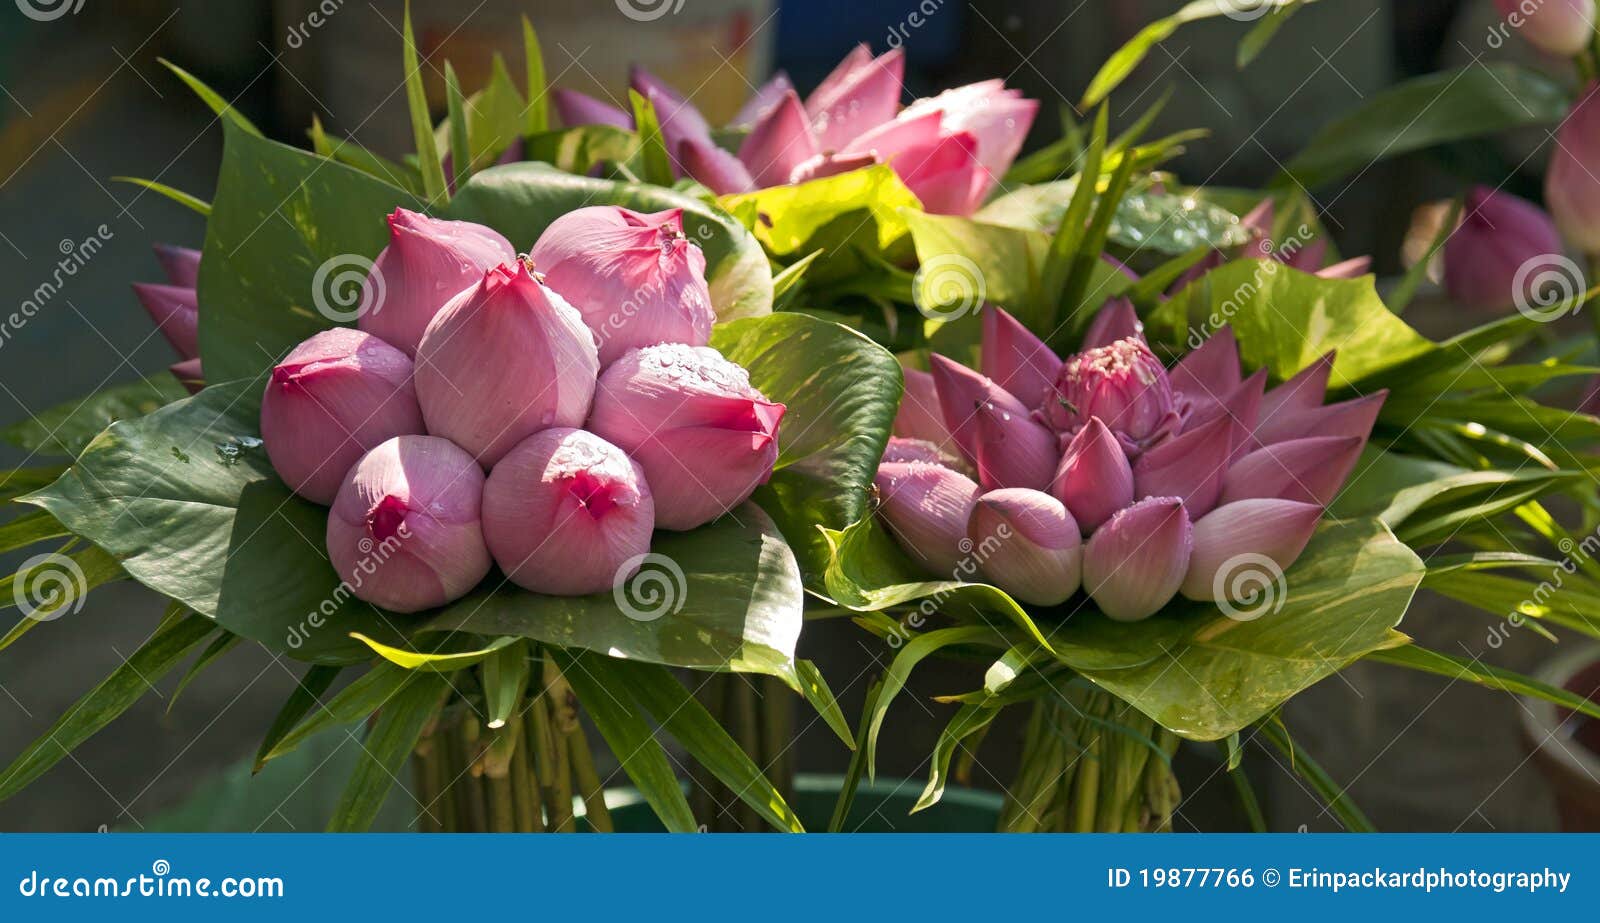 bouquets of lotus buds